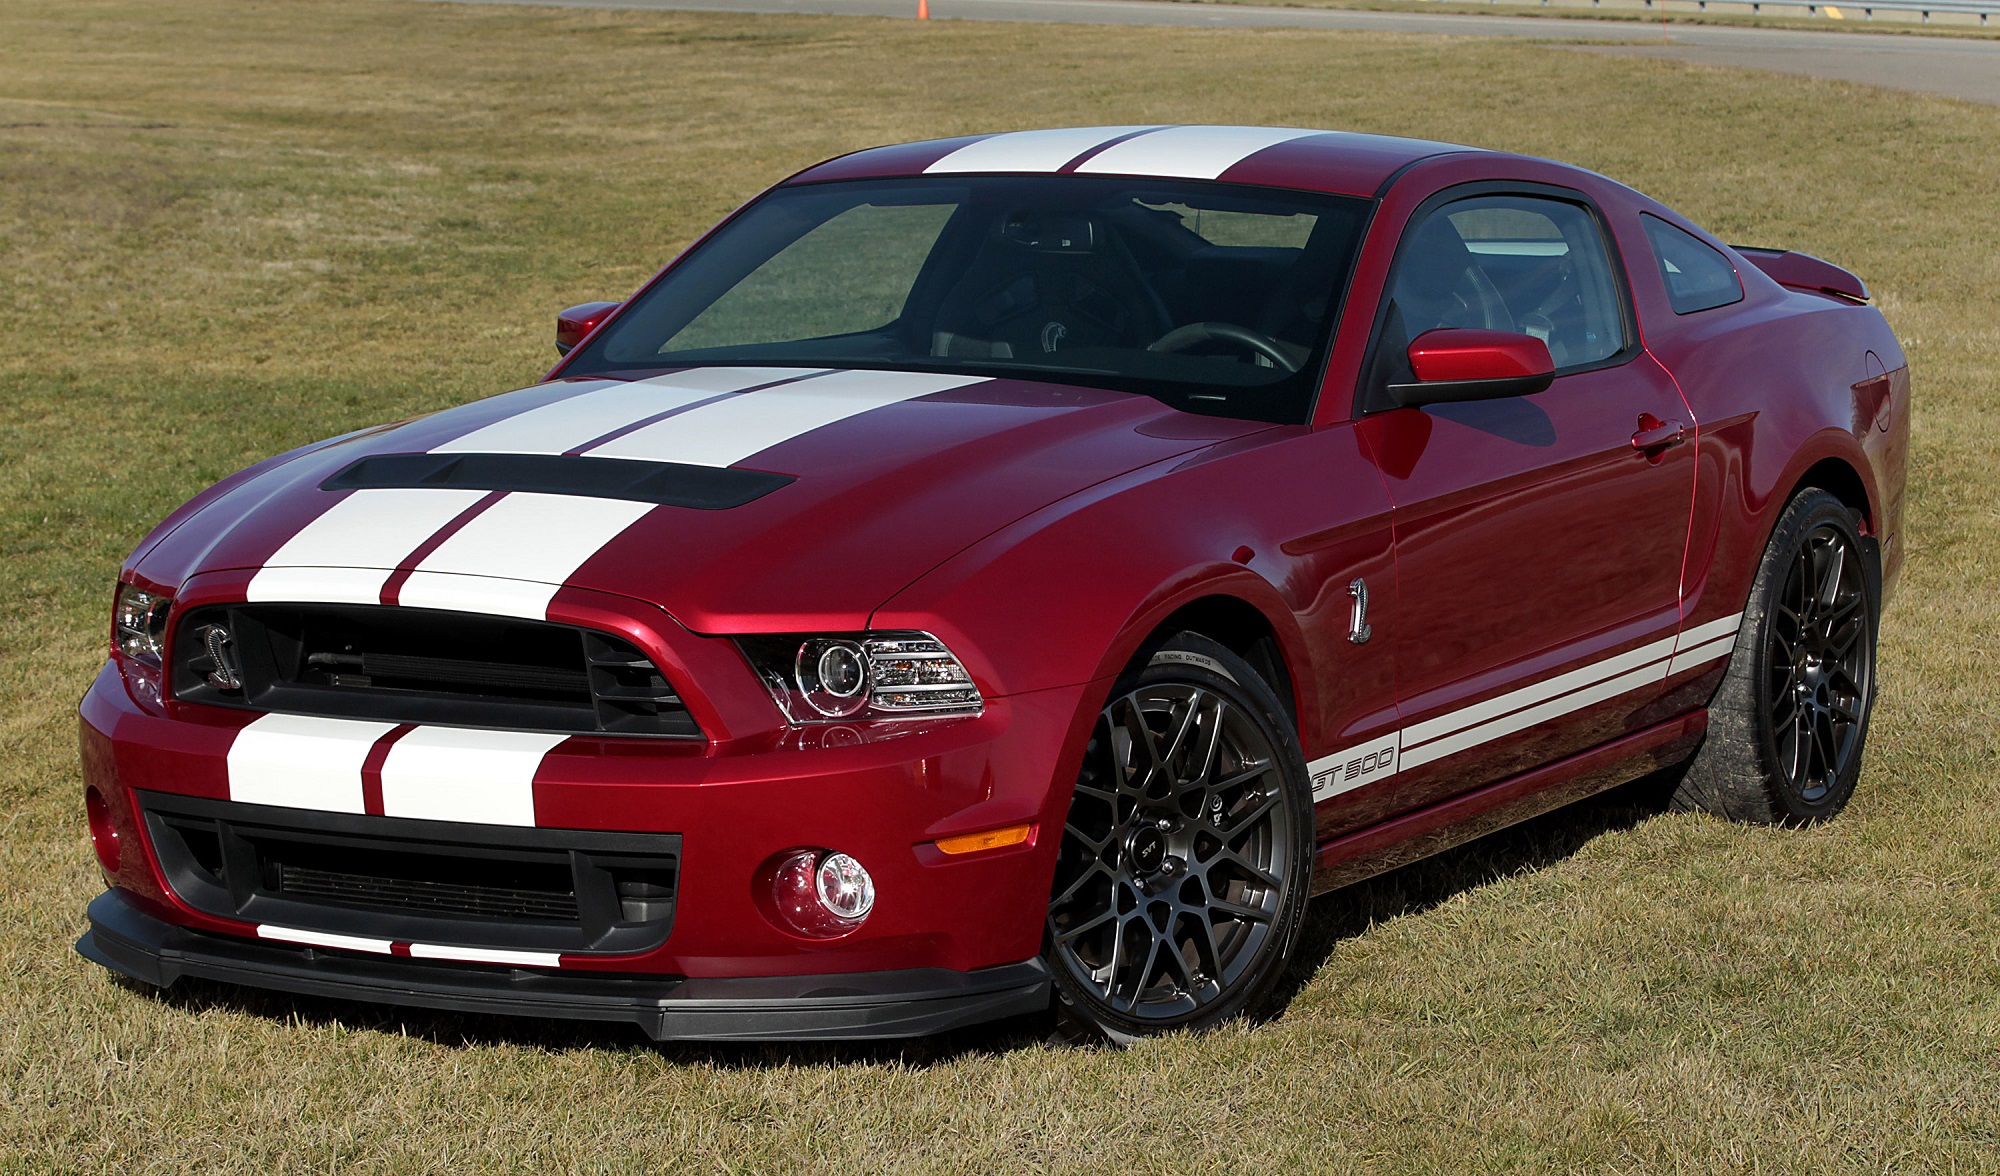 The 2013 Ford Mustang GT500 is a contender to take on the 2015 Dodge Hellcat for supercharged muscle car supremacy.